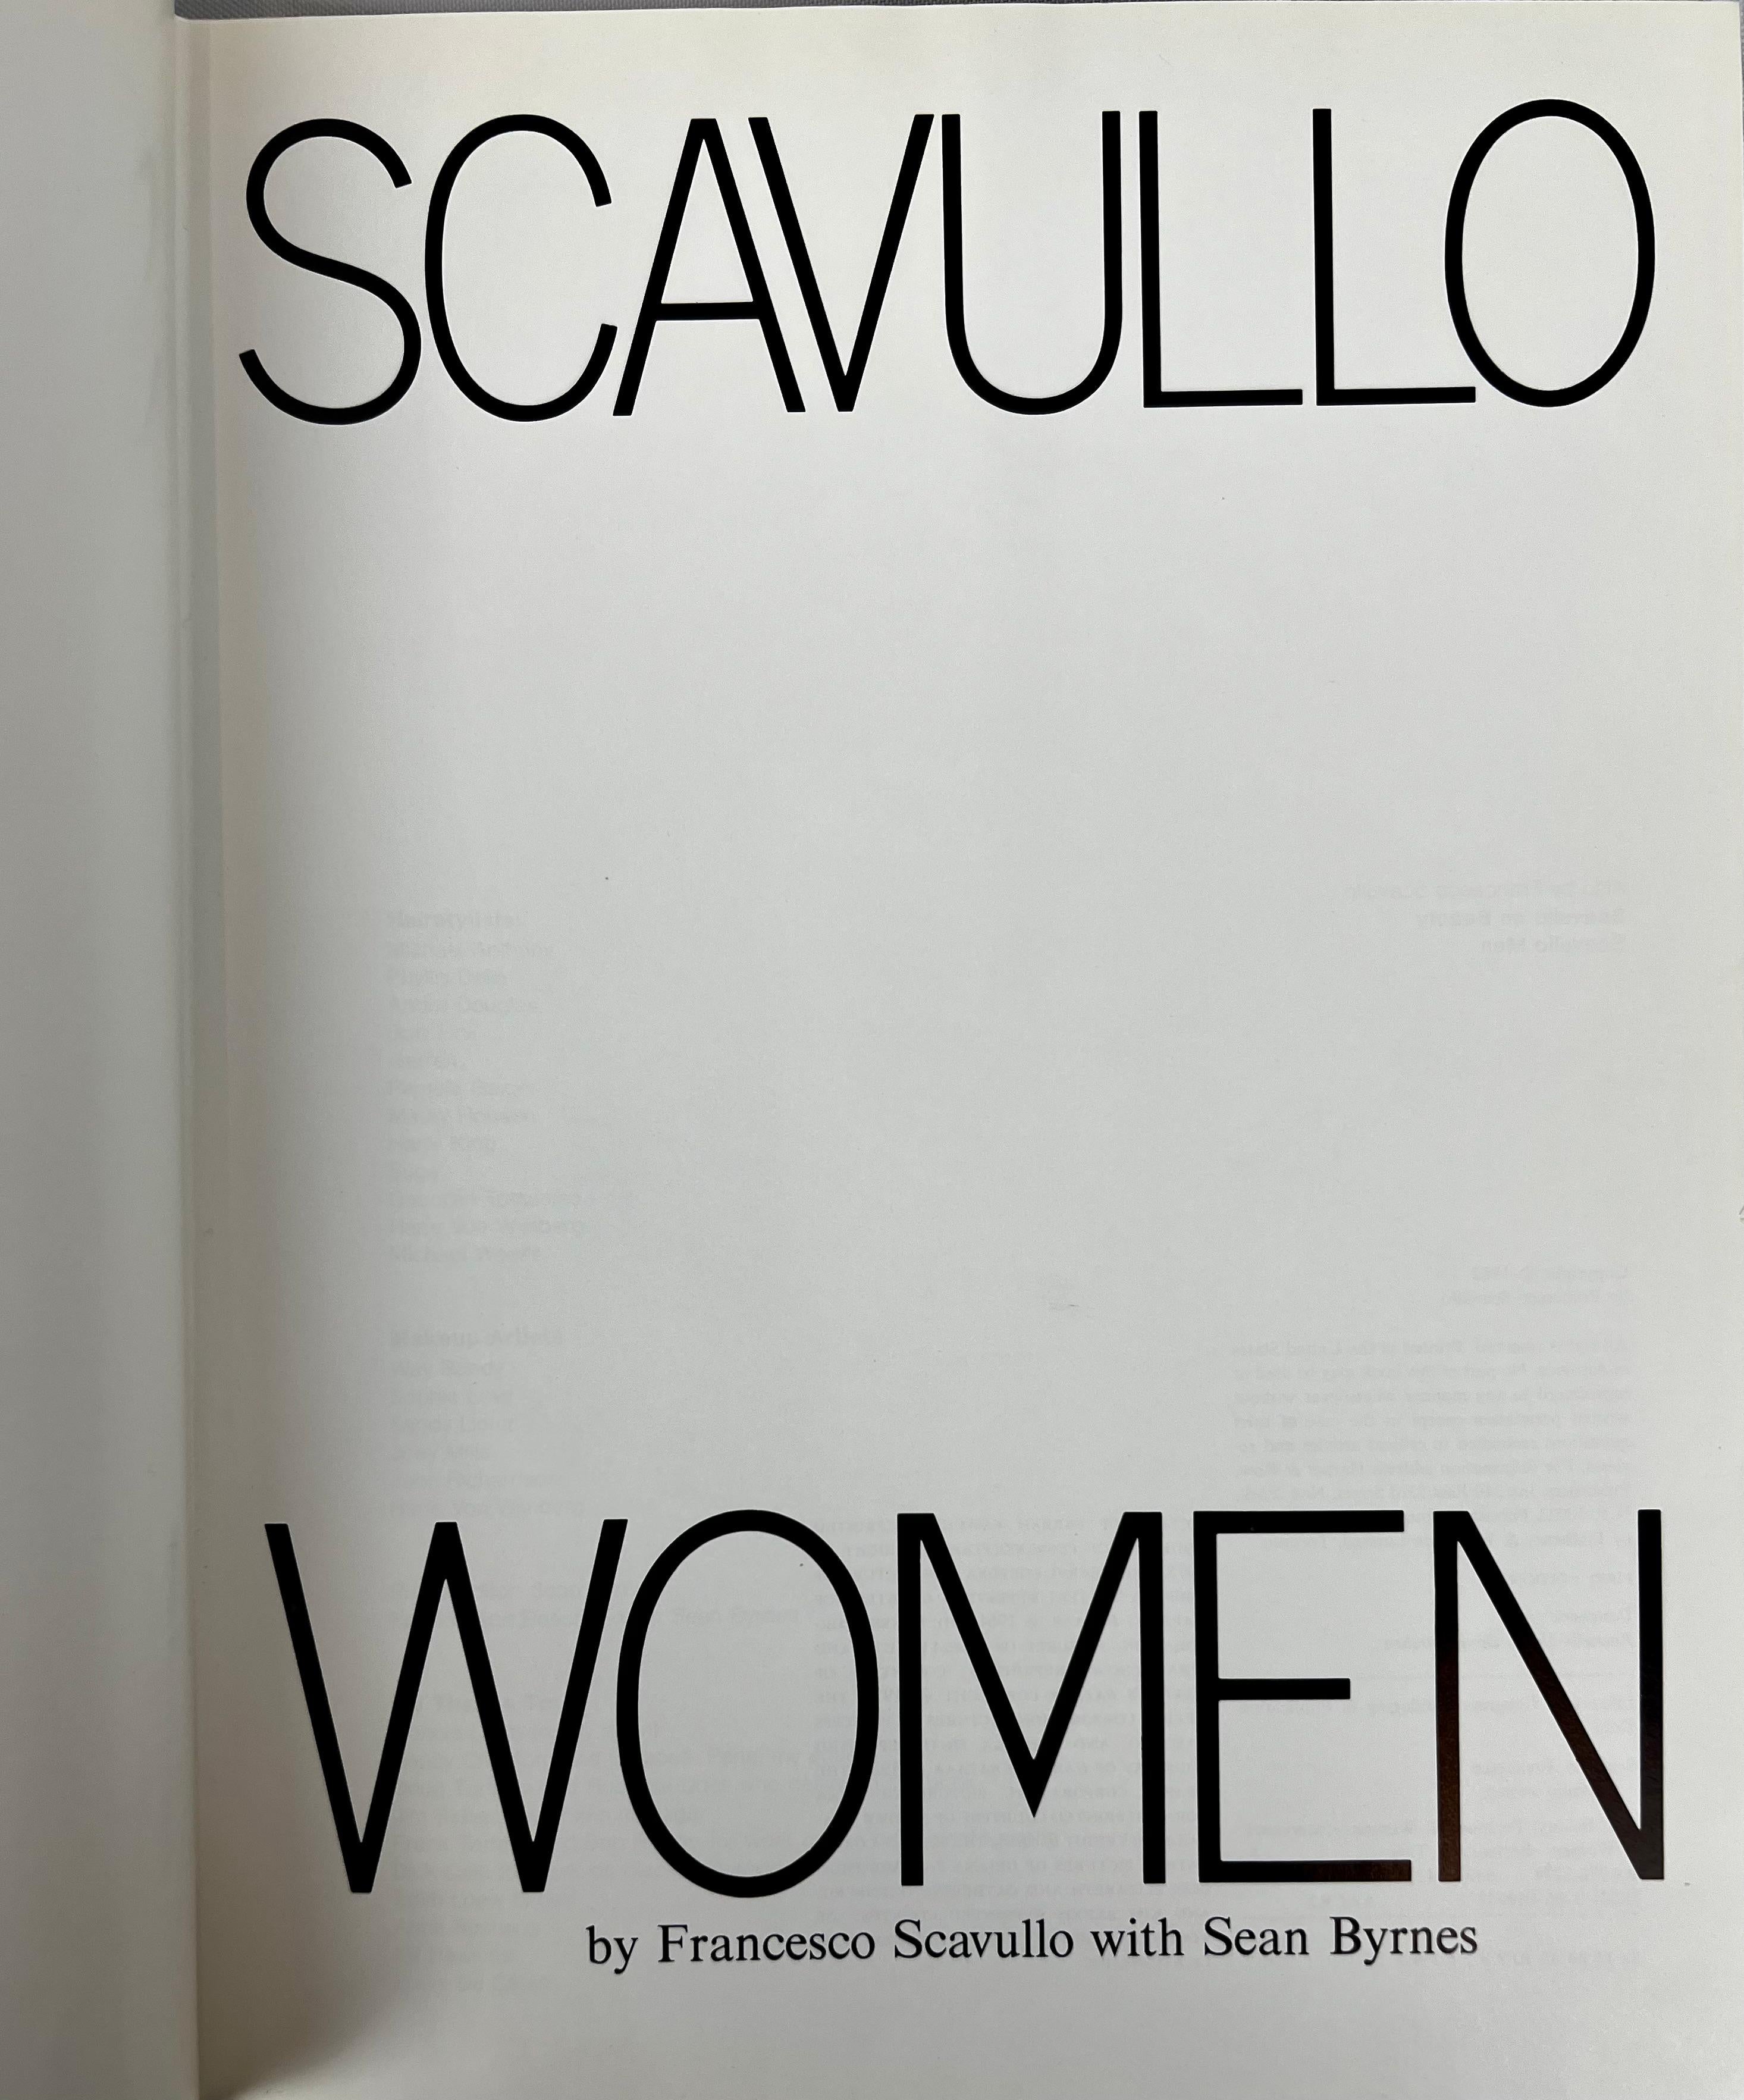 Scavullo Women published in 1982 by Harper & Row, New York. Written by Francesco Scavullo, with 46 of his portraits and candid interviews. The black cloth bound book with its original paper dust cover contains 187 pages. 